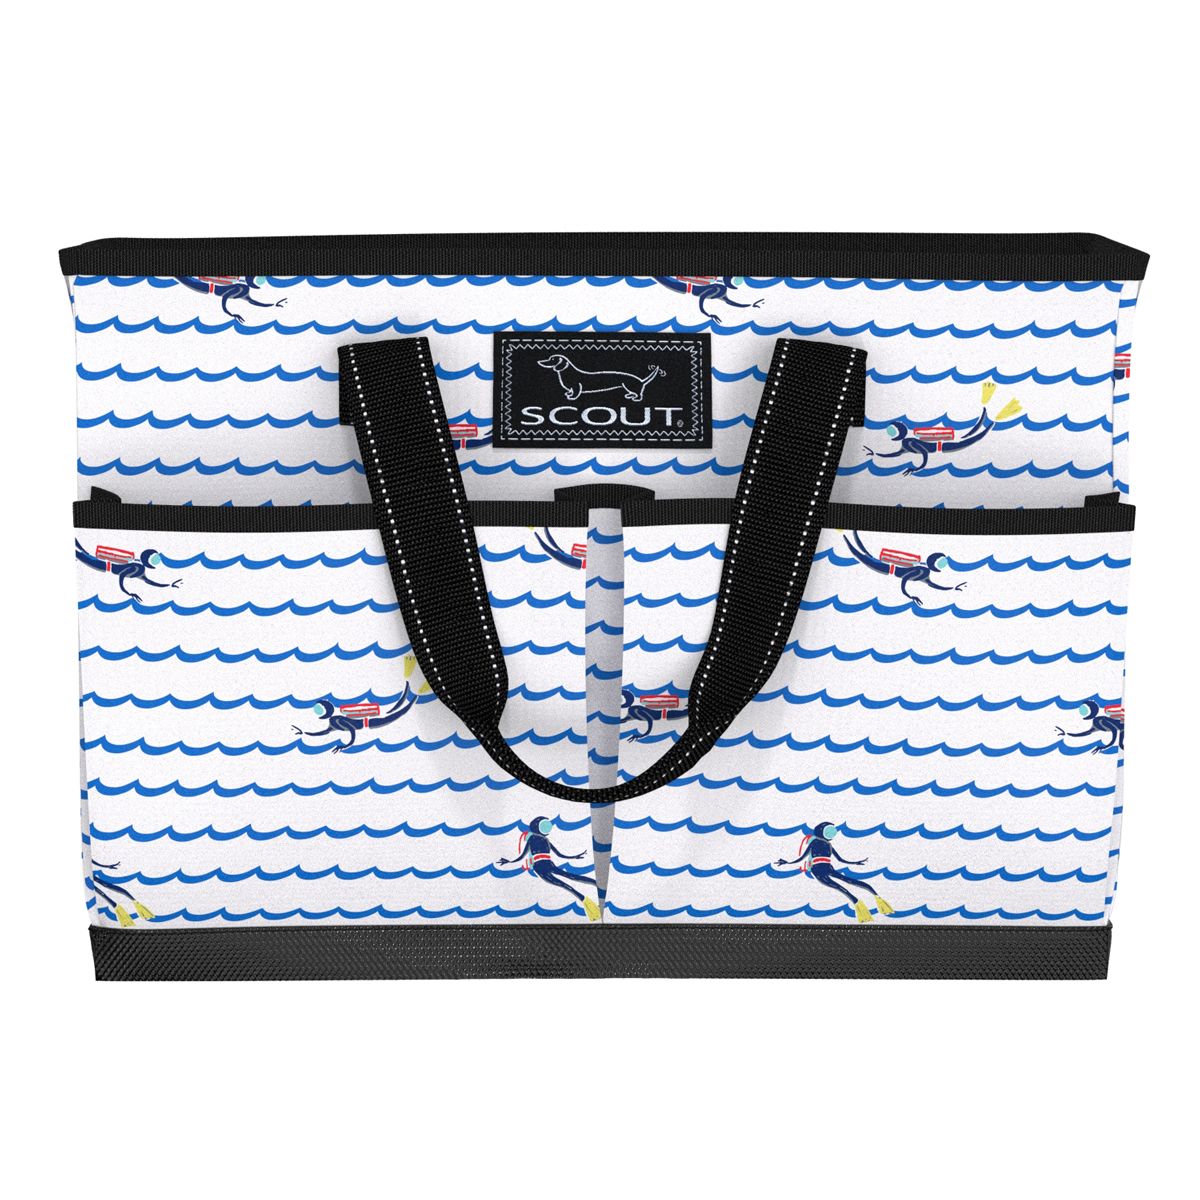 The BJ Bag Pocket Tote by Scout - Dive Bar